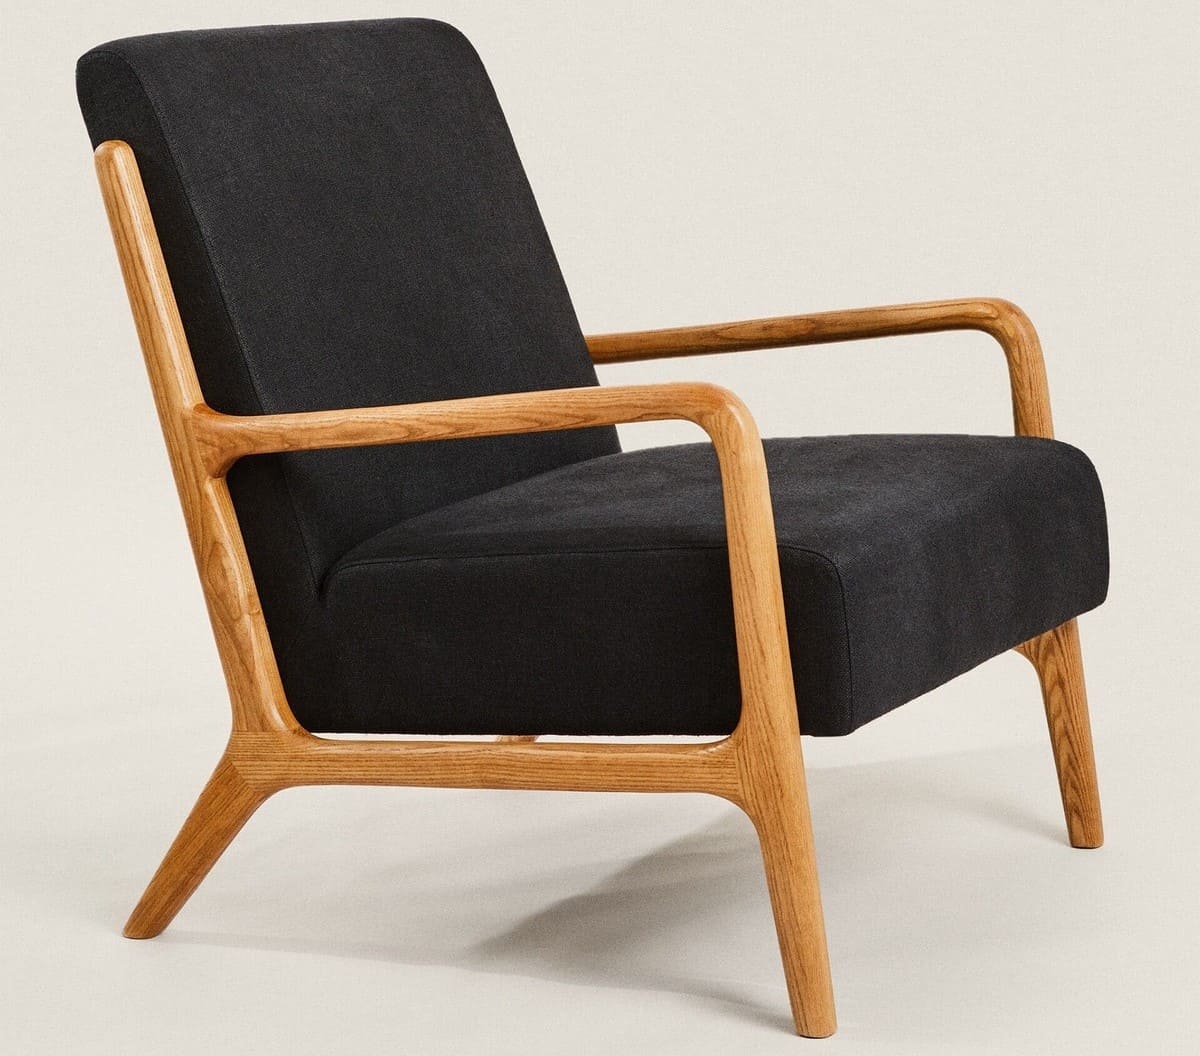 Ash Wood and linen armchair from Zara Home